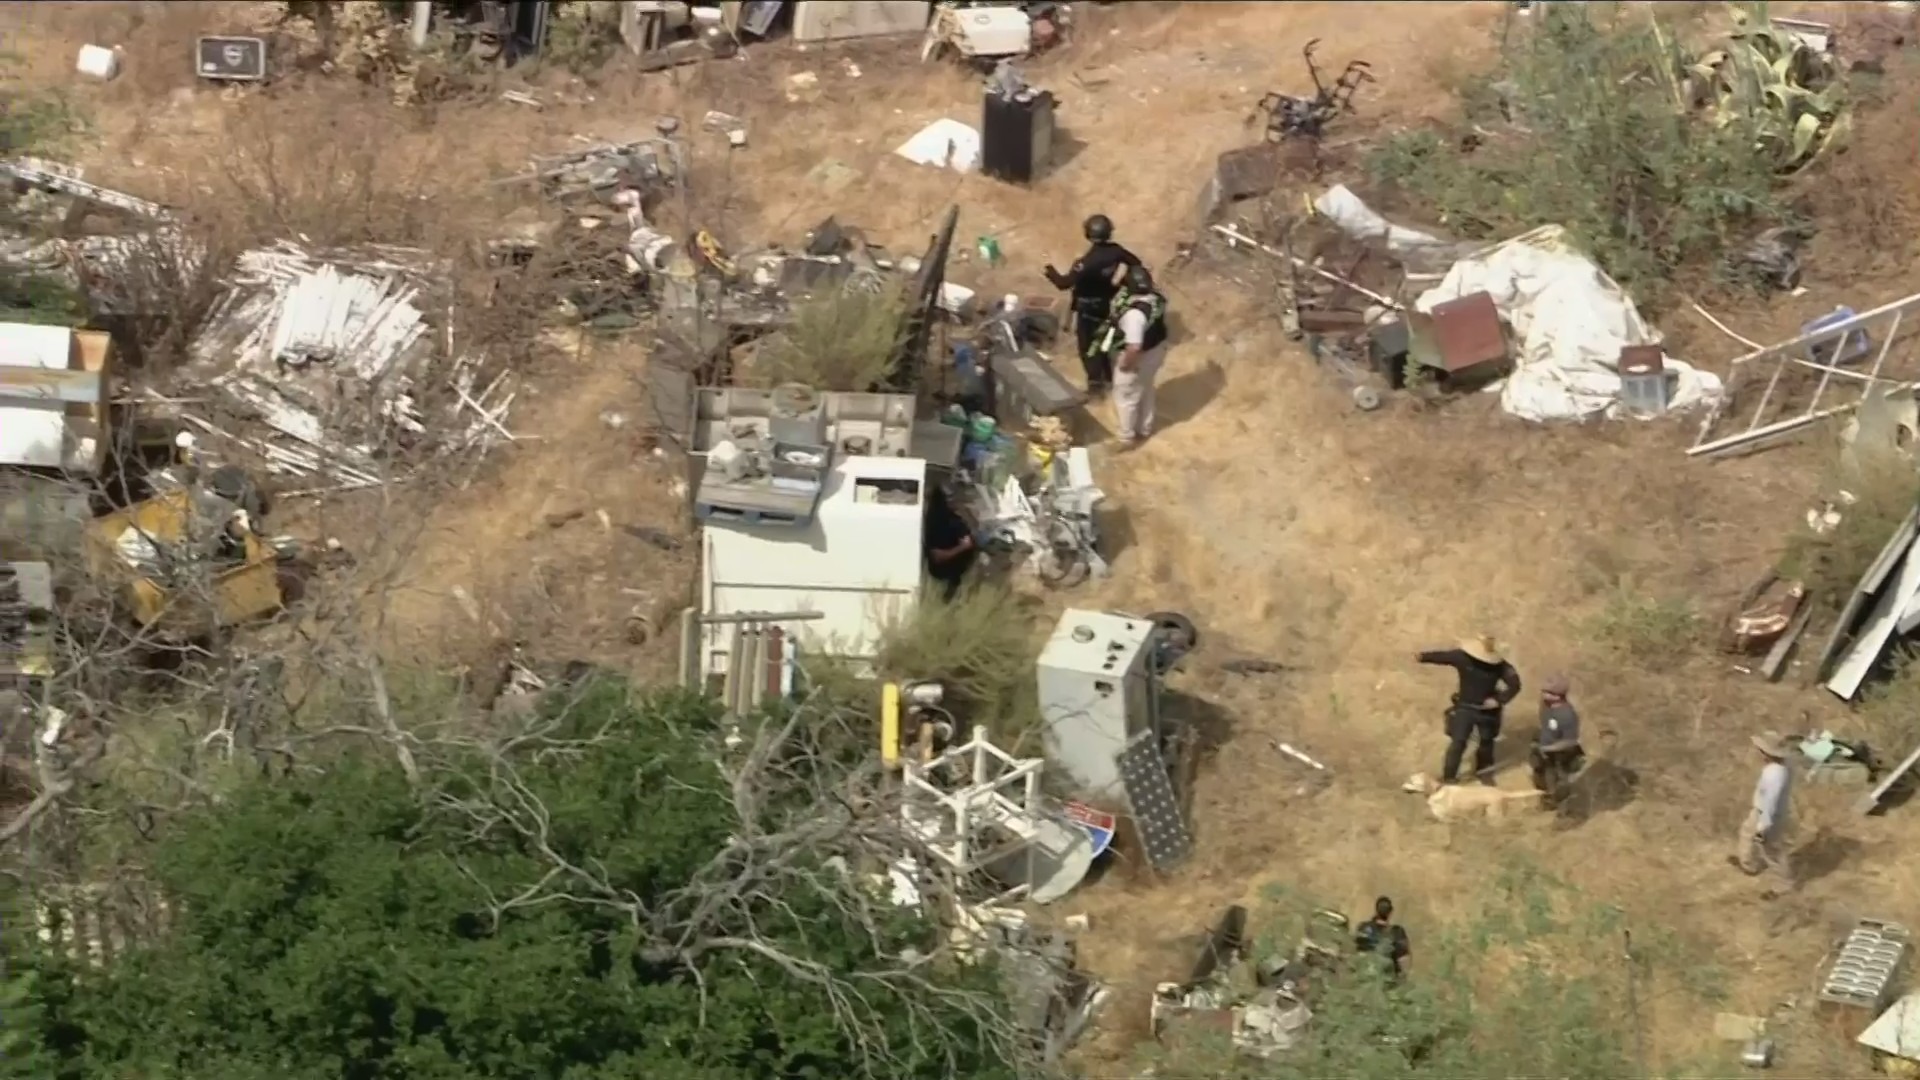 Armed law enforcement enters a property described as a 'junkyard' in Sun Valley